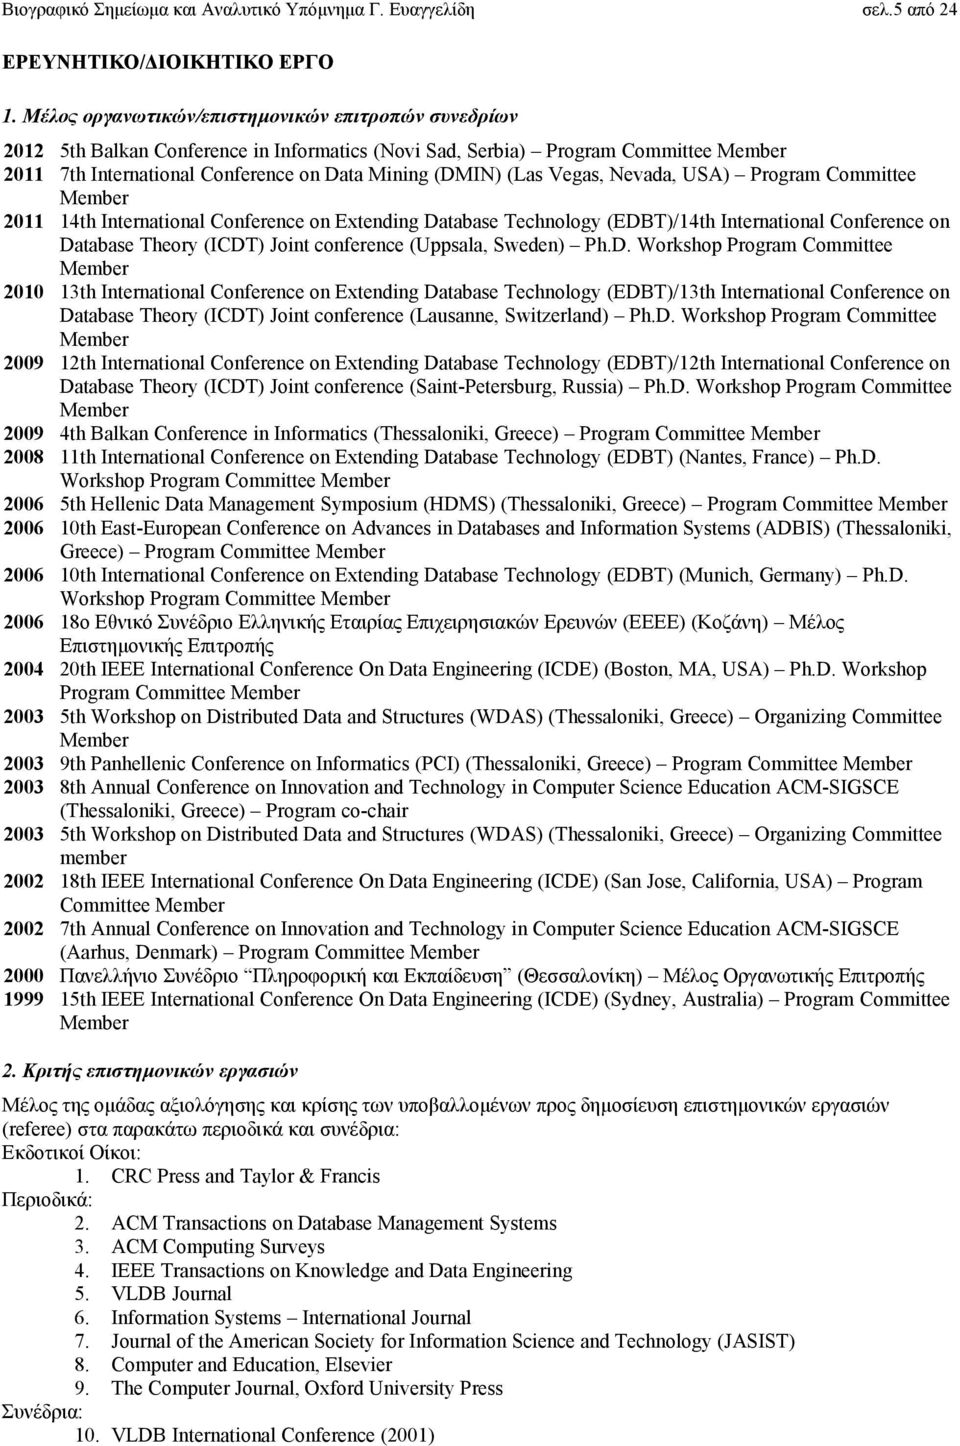 Vegas, Nevada, USA) Program Committee Member 2011 14th International Conference on Extending Database Technology (EDBT)/14th International Conference on Database Theory (ICDT) Joint conference